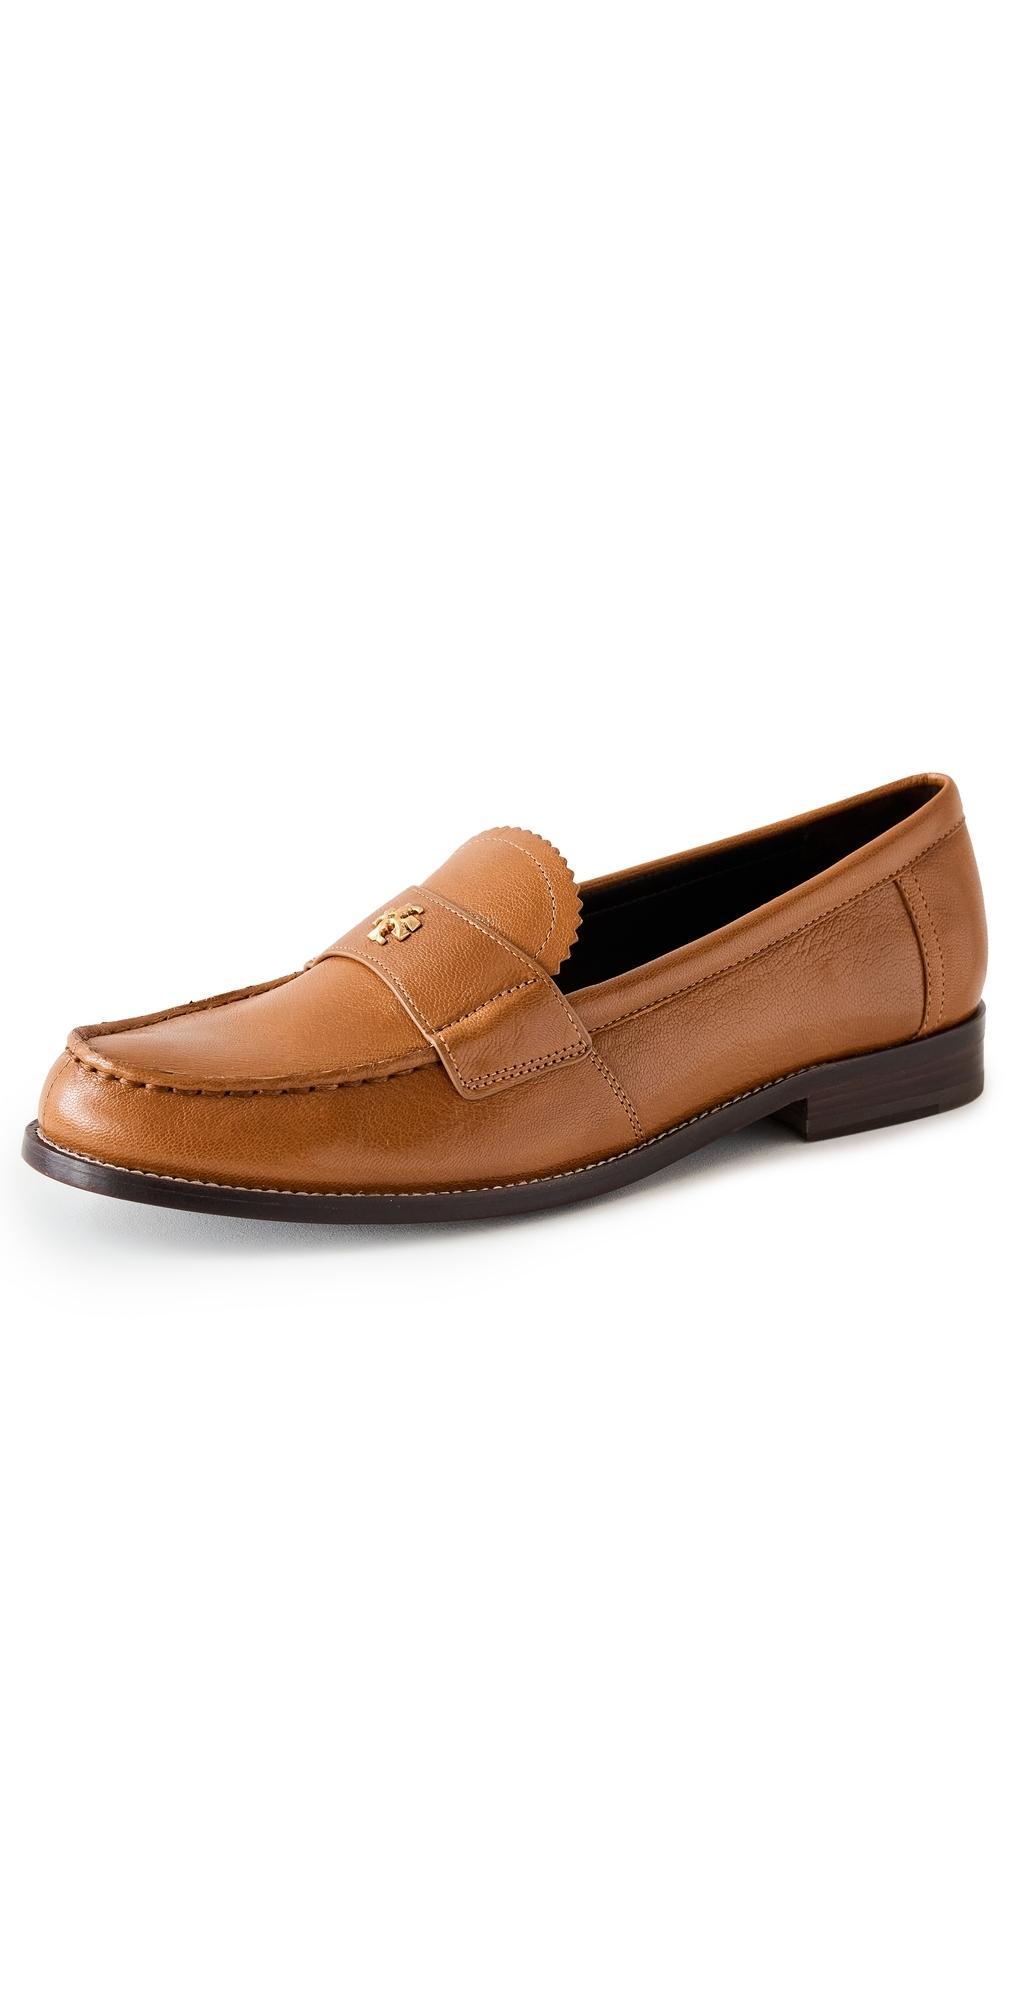 Tory Burch Classic Loafer Product Image